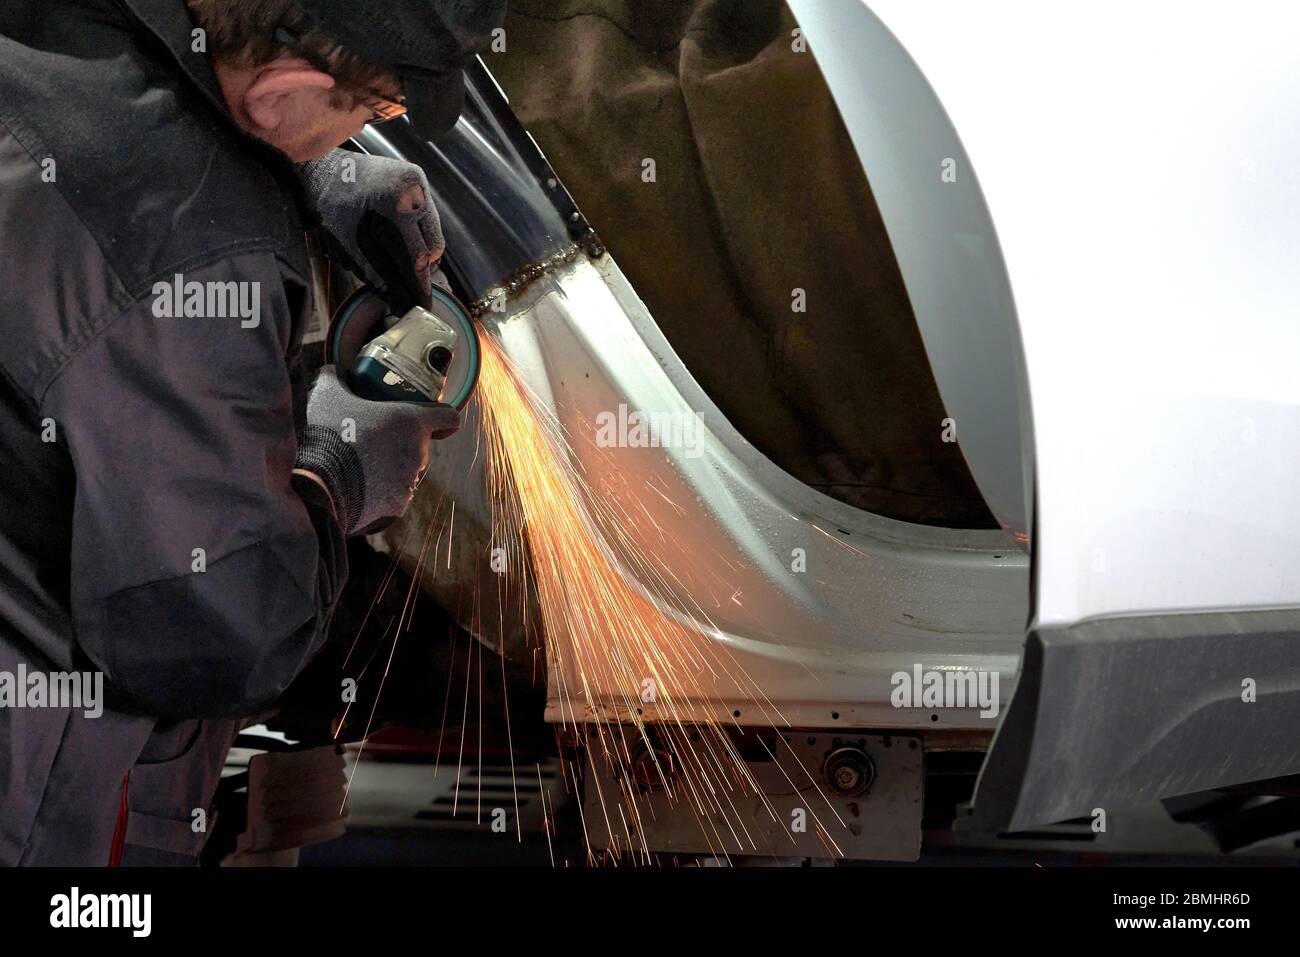 Repair service worker fix damaged car. Working with angle grinder to fix metal body. Stock Photo